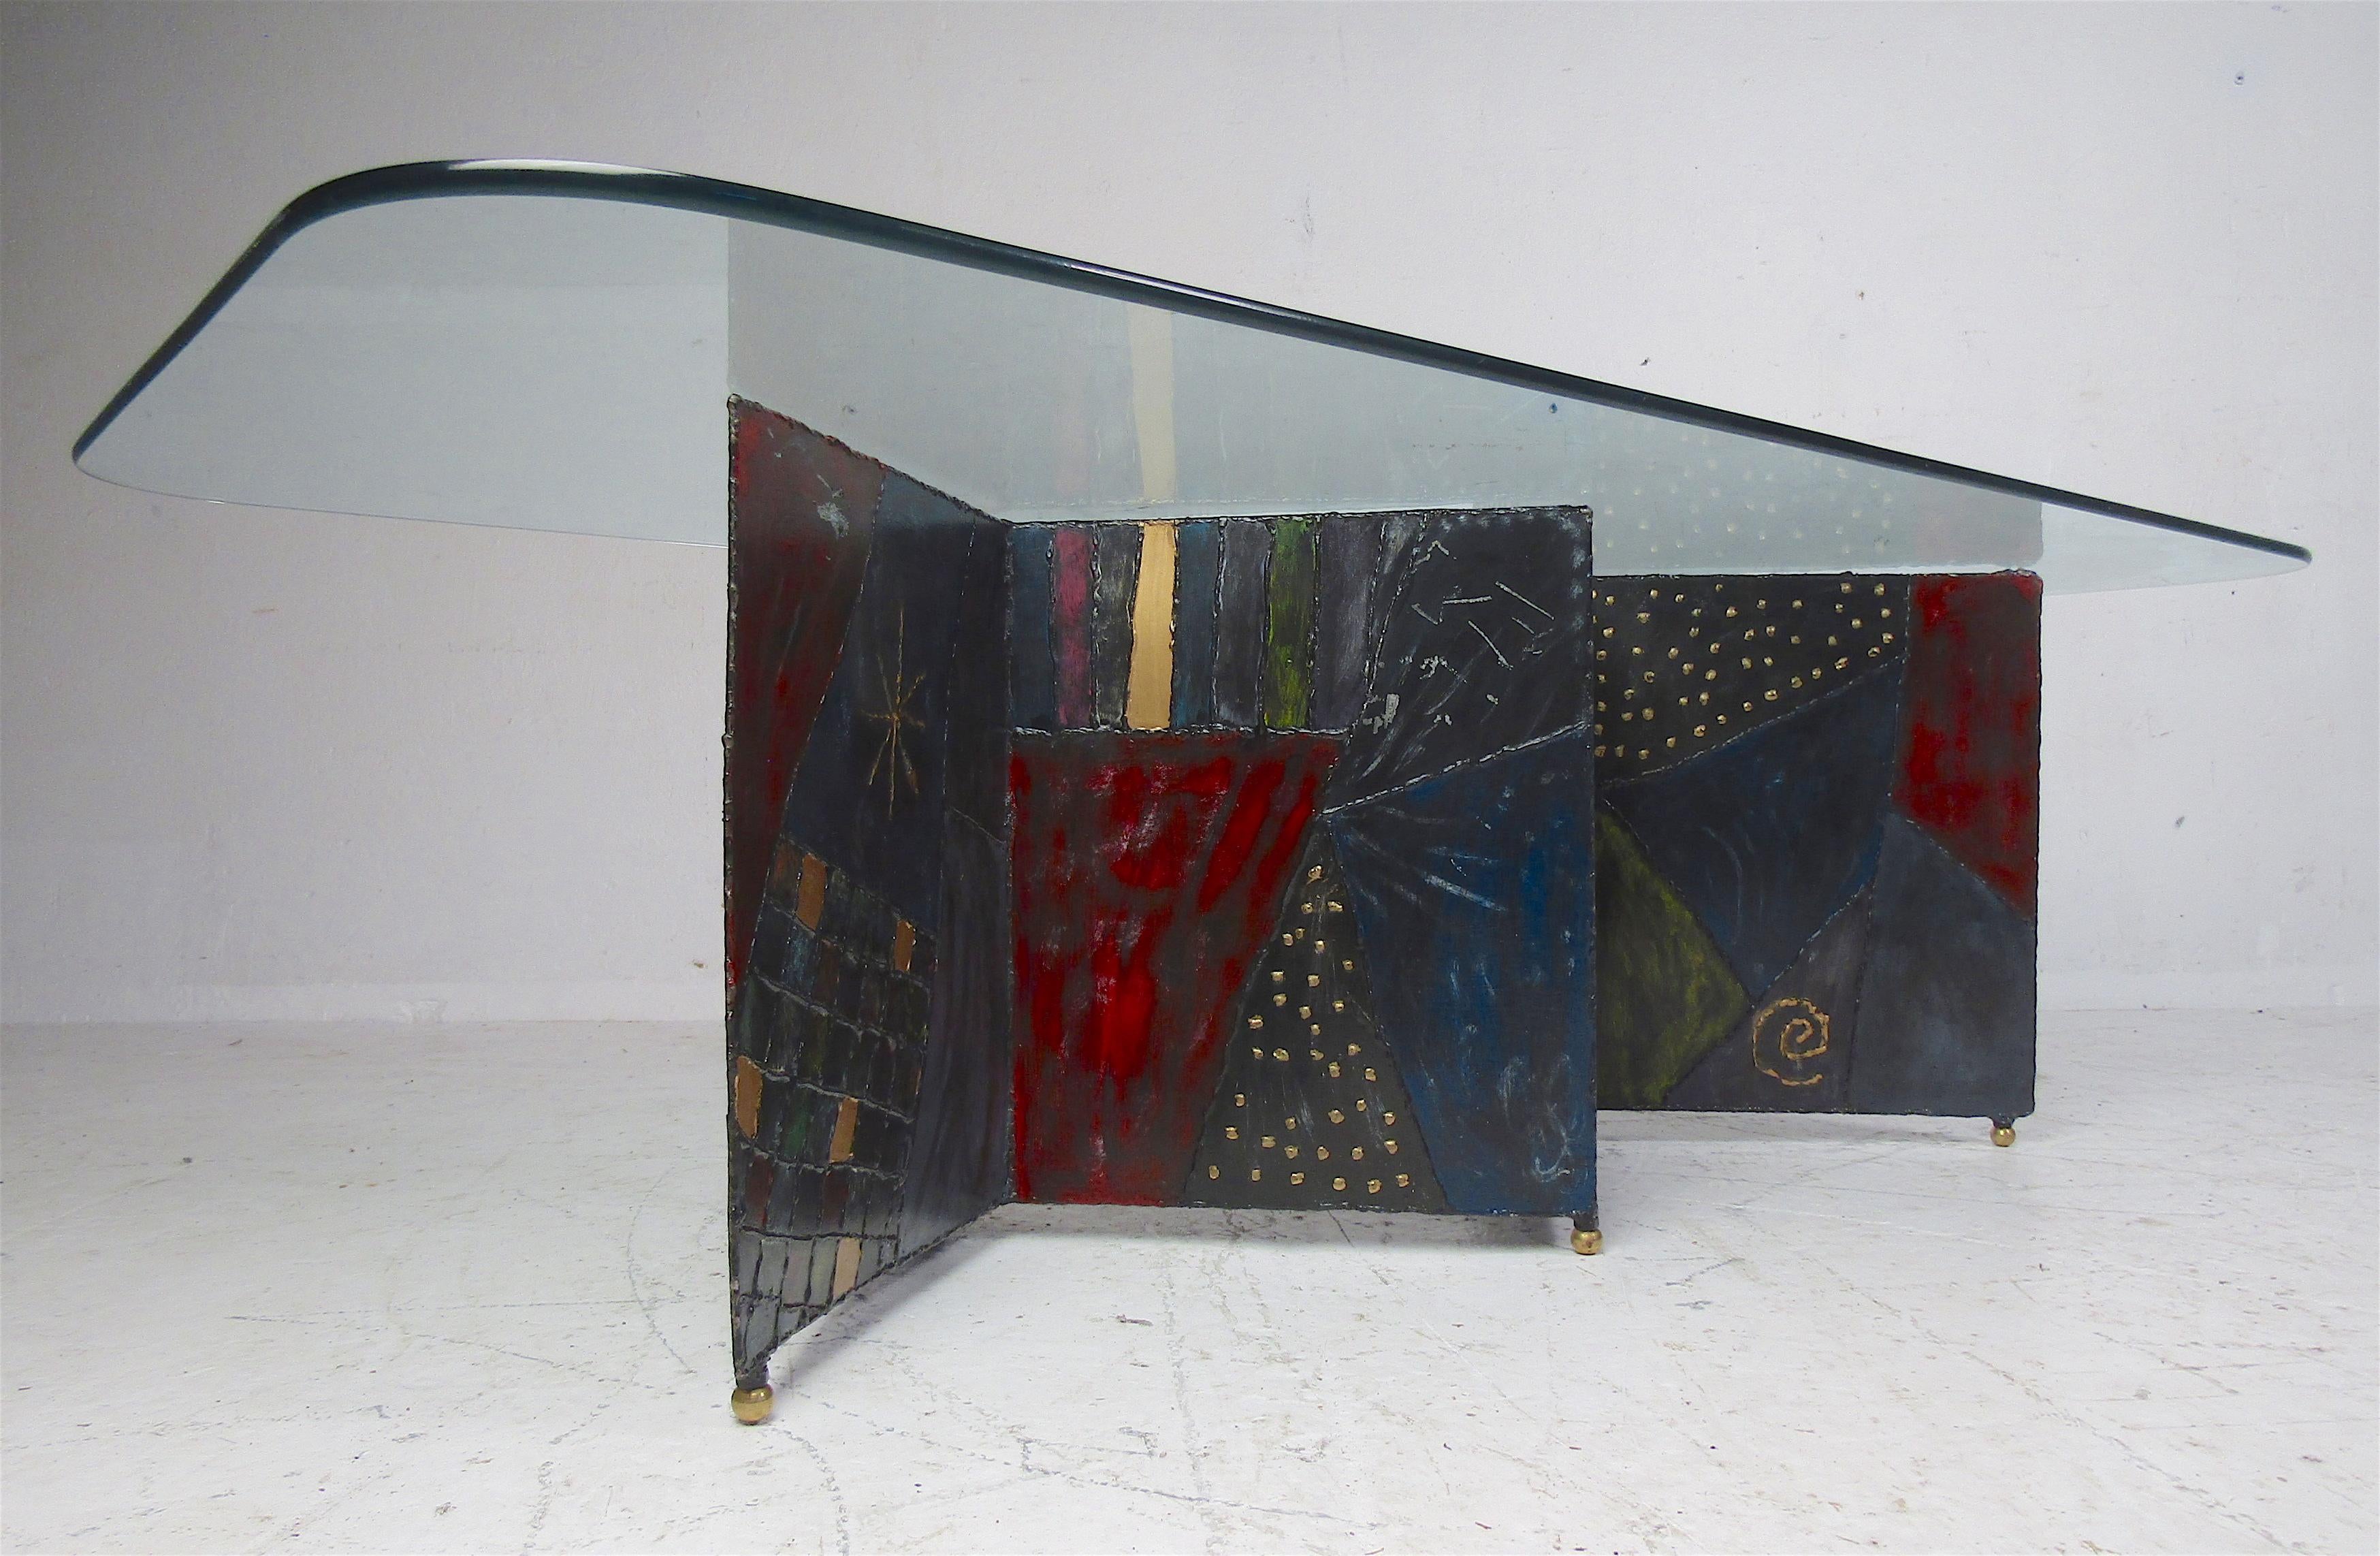 A stunning vintage modern Paul Evans coffee table with a welded metal zig-zag base and a glass top. The unusual designs and colors on the base add to the allure. The perfect addition to any home, business, or office. Please confirm item location (NY